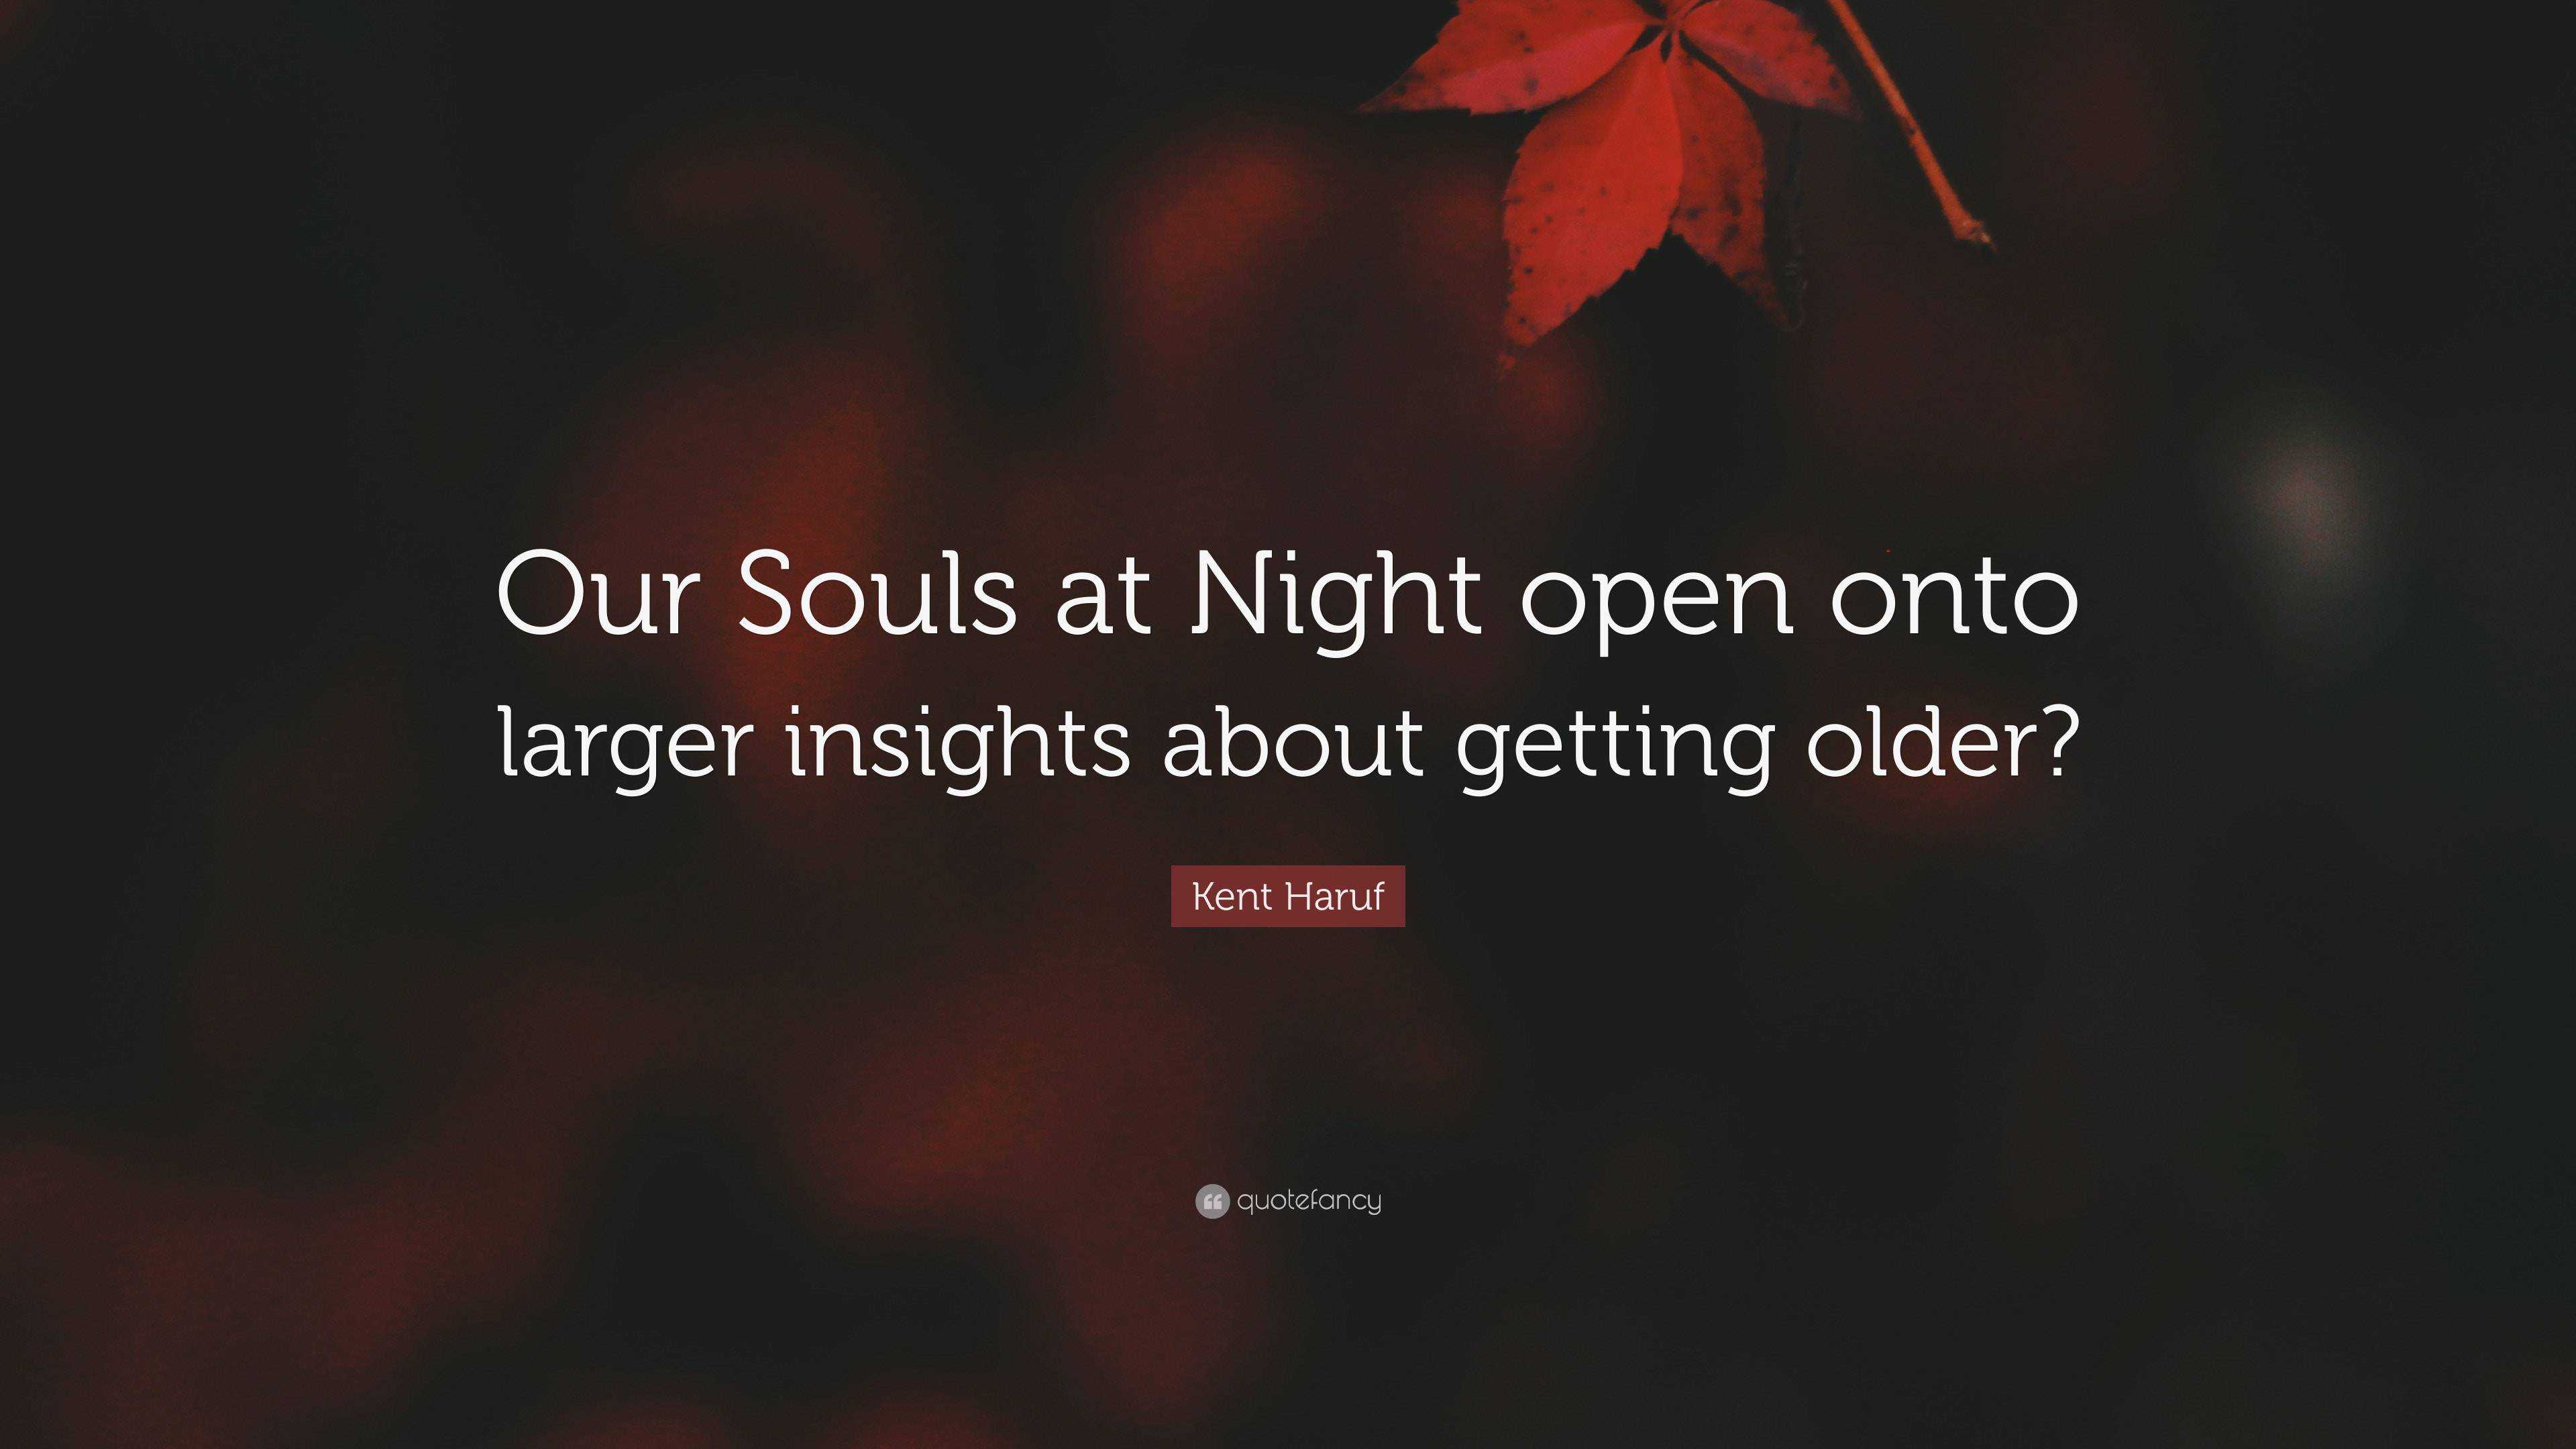 Kent Haruf Quote: “Our Souls At Night Open Onto Larger Insights About Getting Older?”